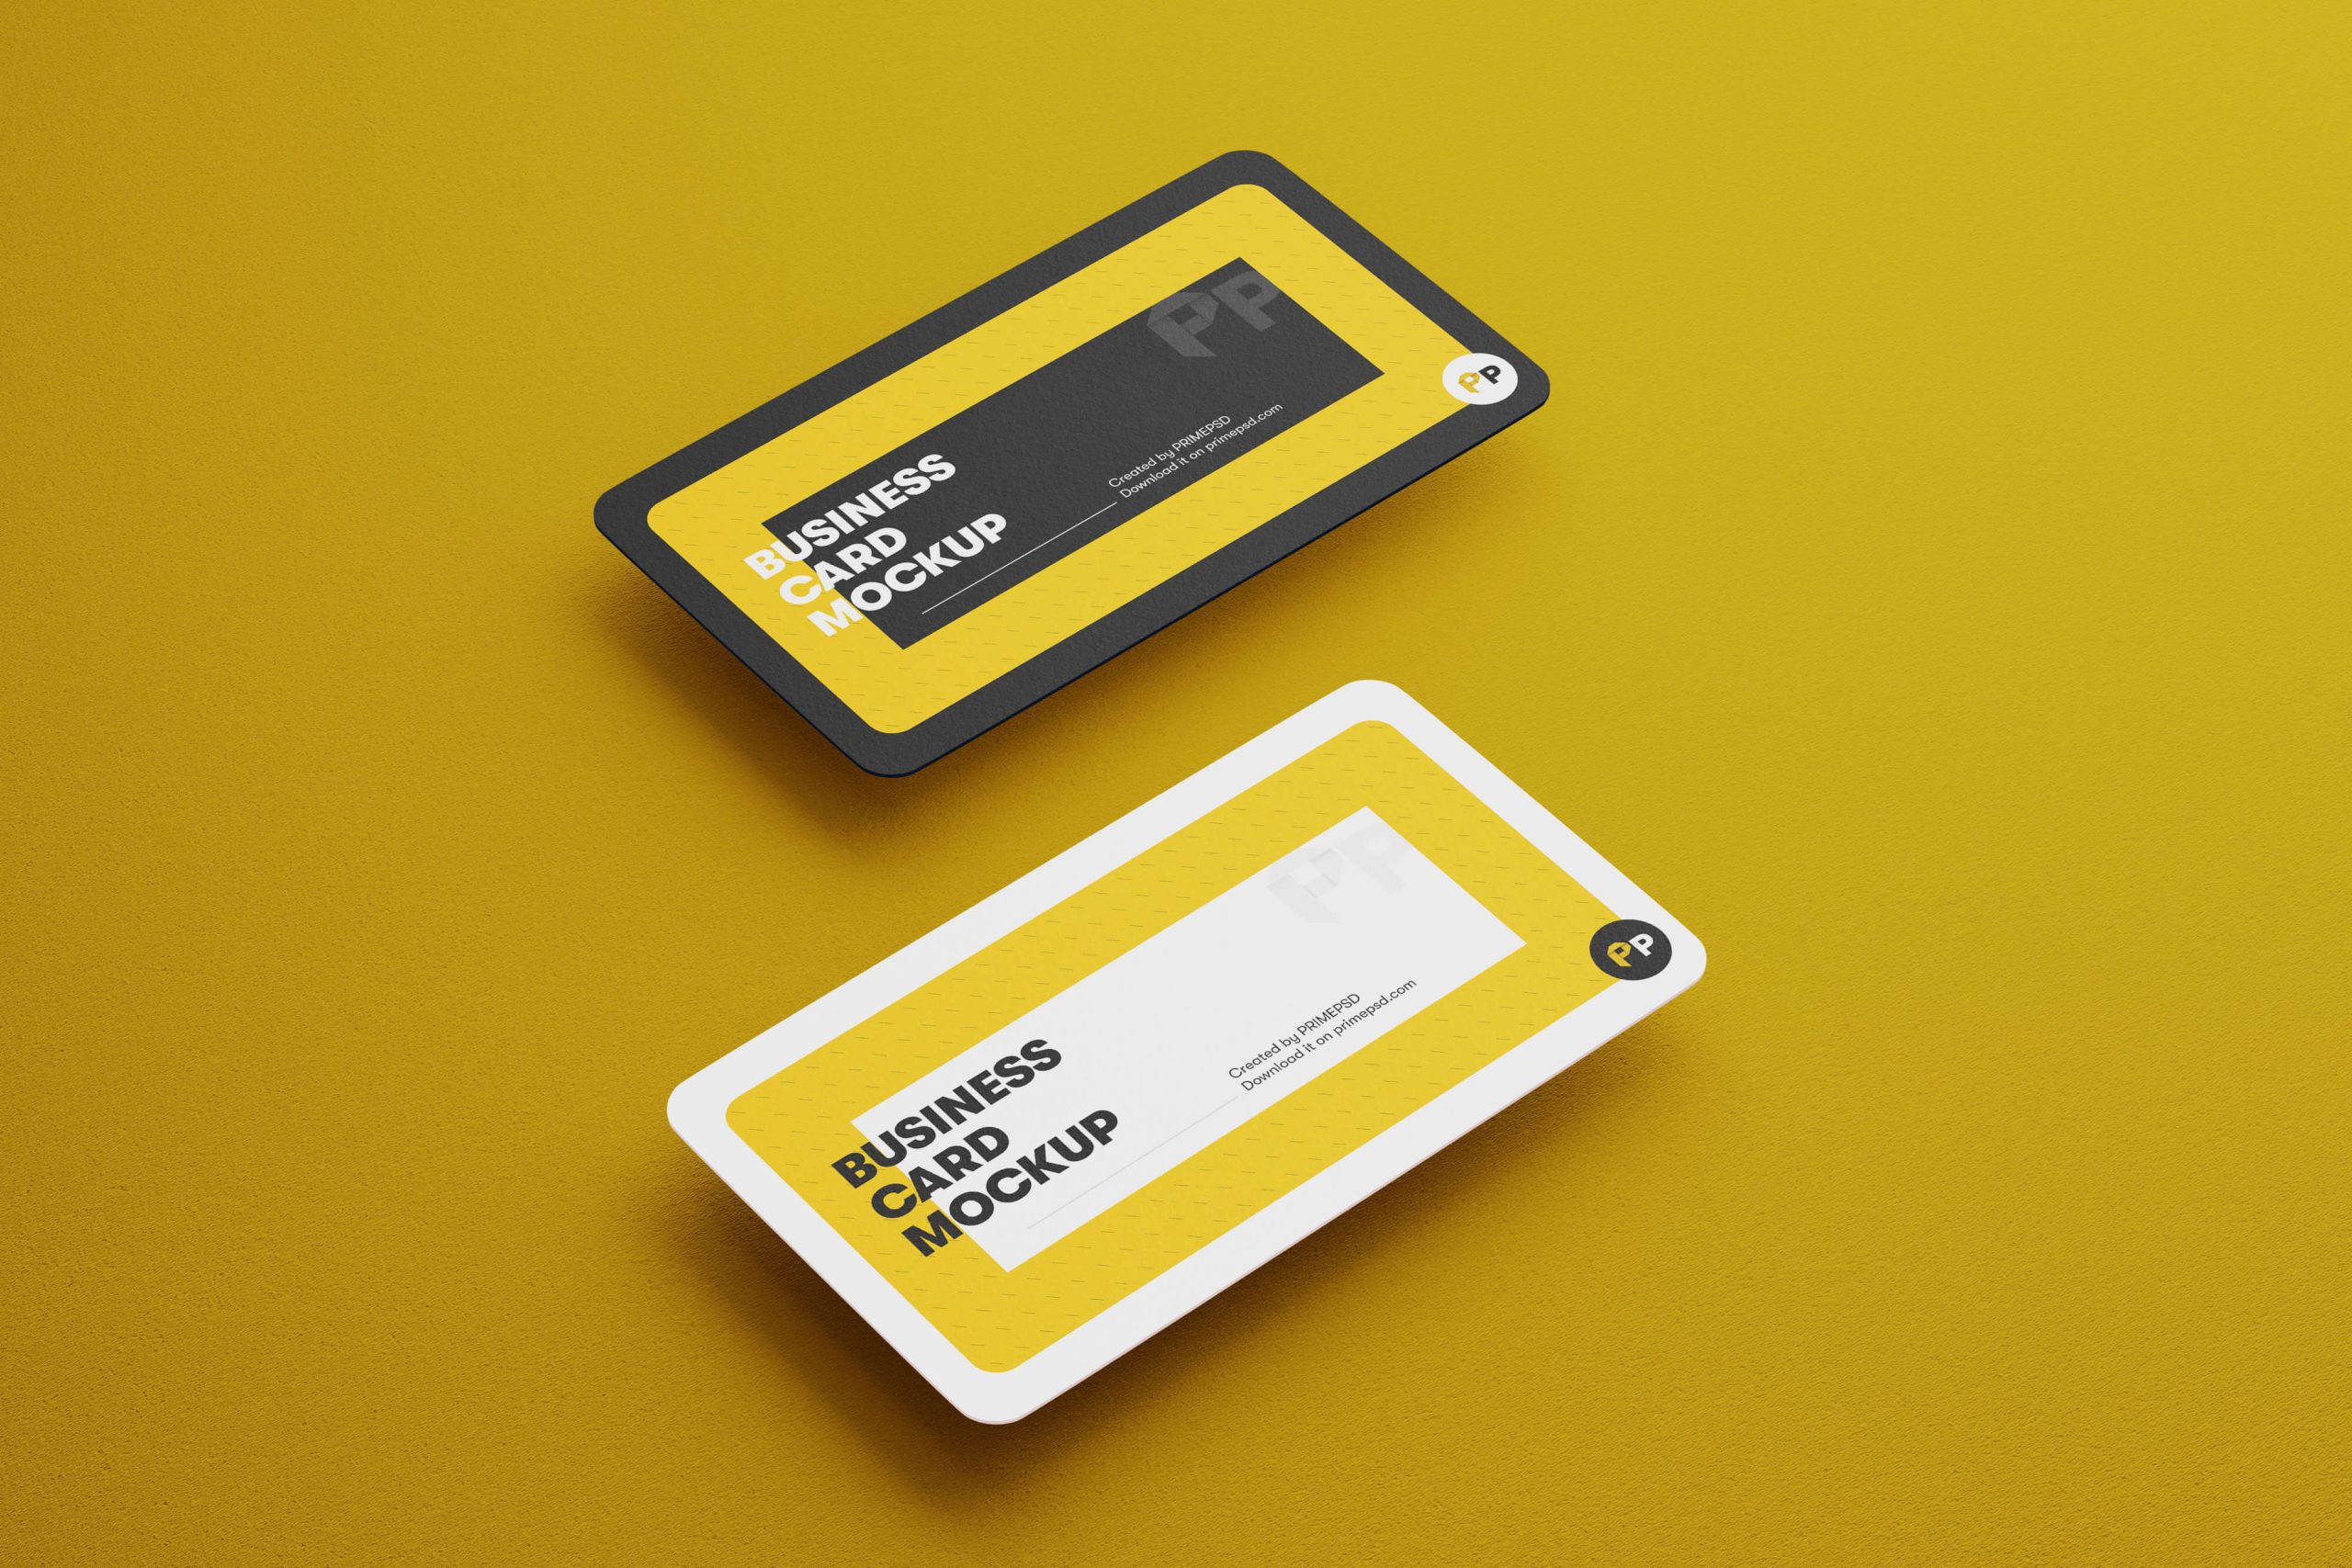 Business Card Mockup Free PSD Front Back, business card mockup, business card mockup free psd, business card mockup psd, mockup psd, branding mockup, branding mockup psd, psdbuddy, primepsd